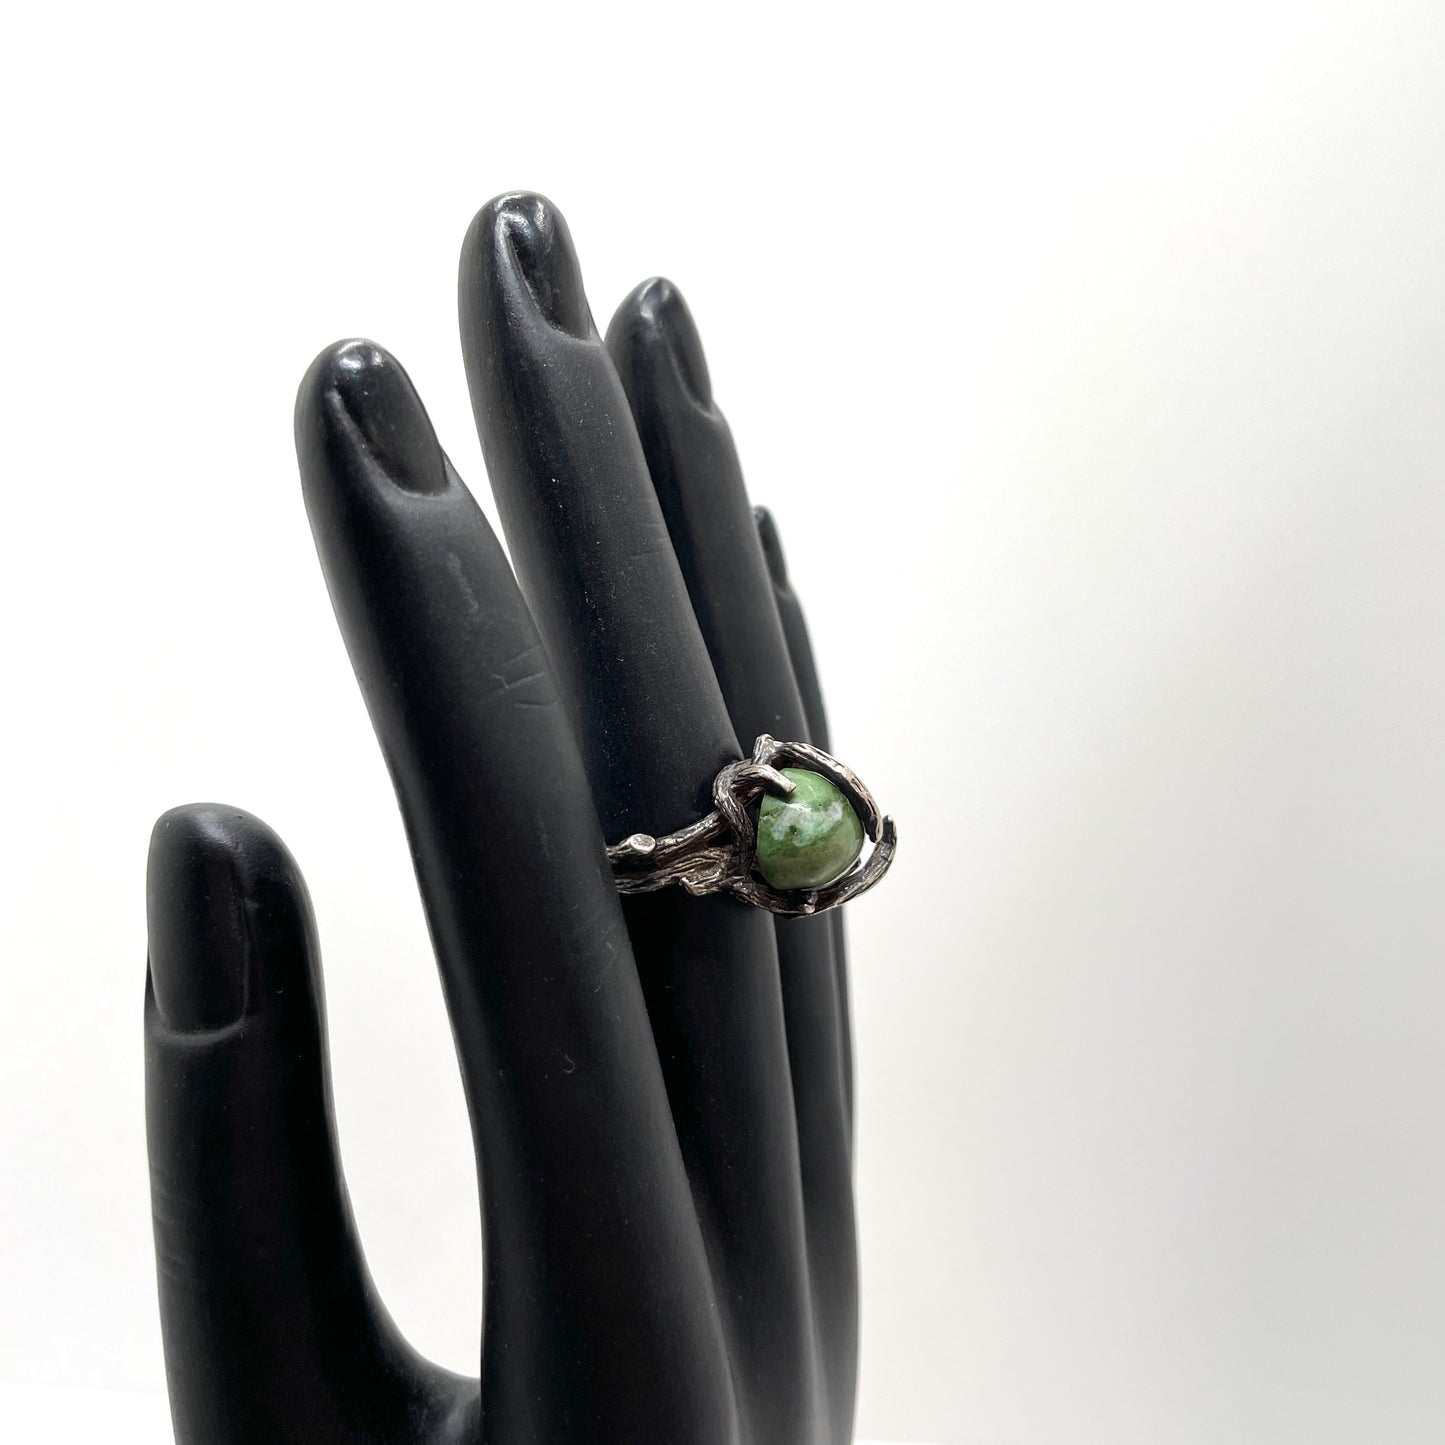 Brutalist Silver & Green Stone Ring - Size 7.25